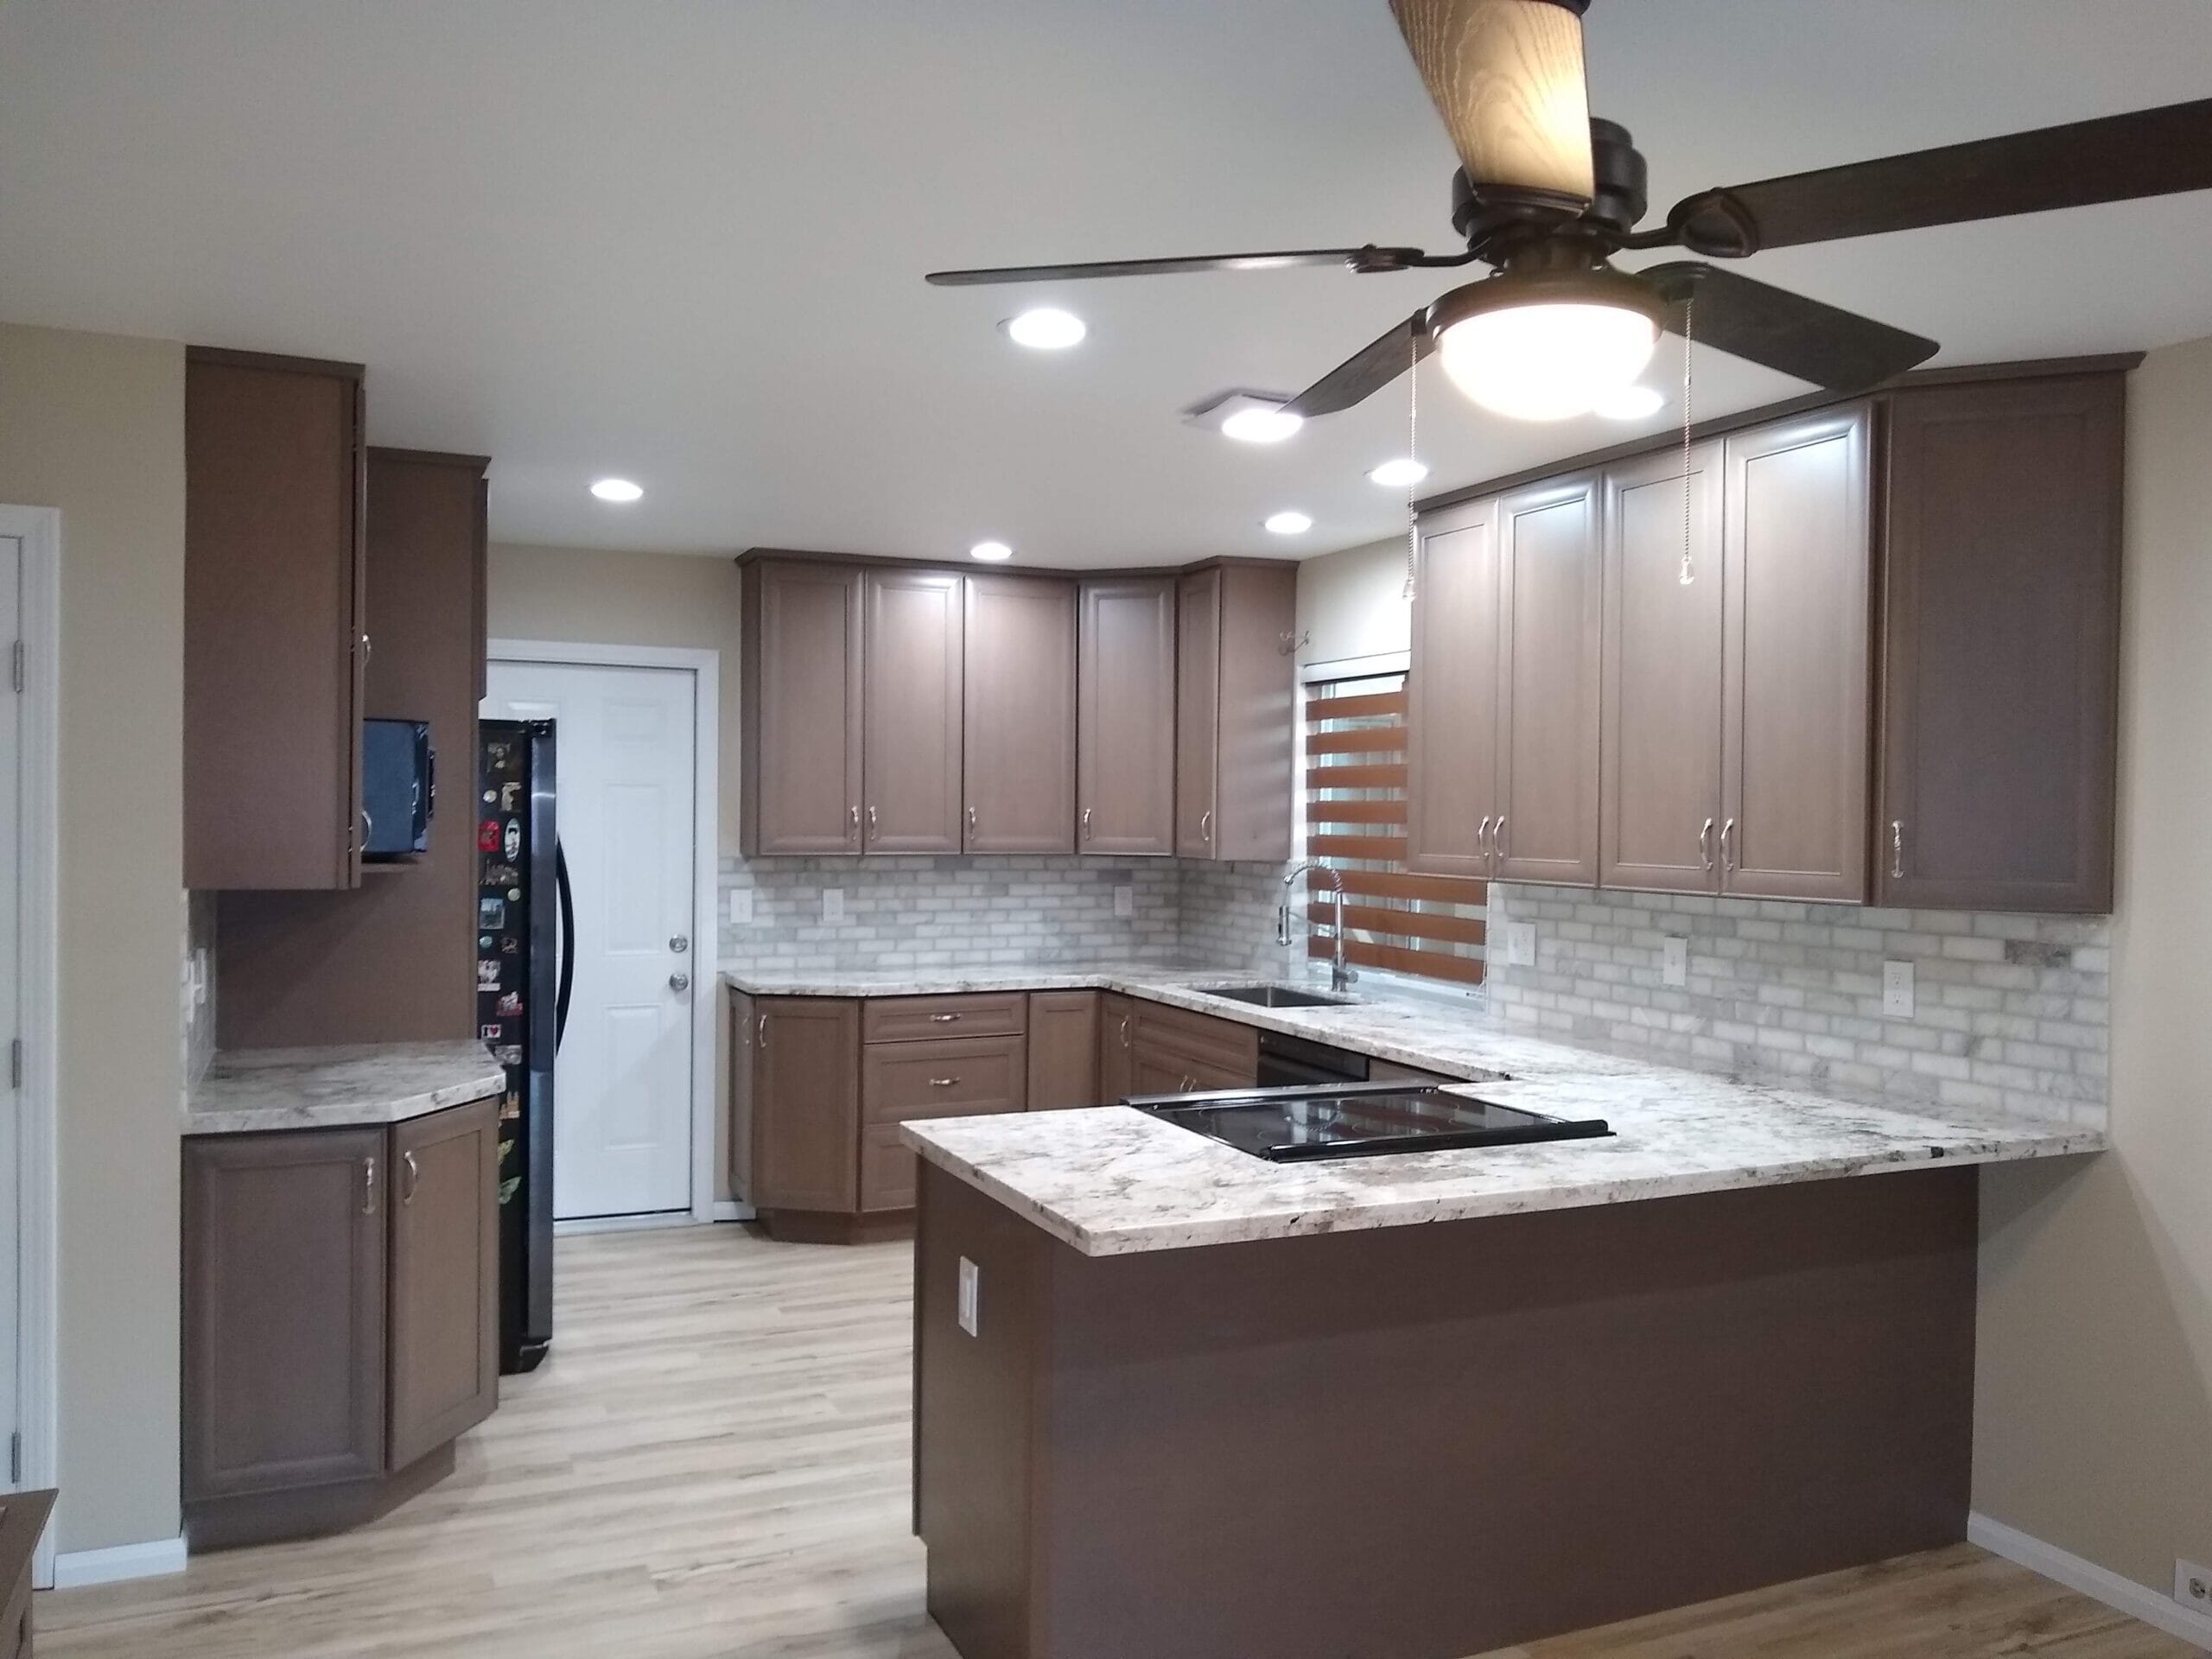 San Diego – “Entire Home Remodel” All Wood Open Kitchen